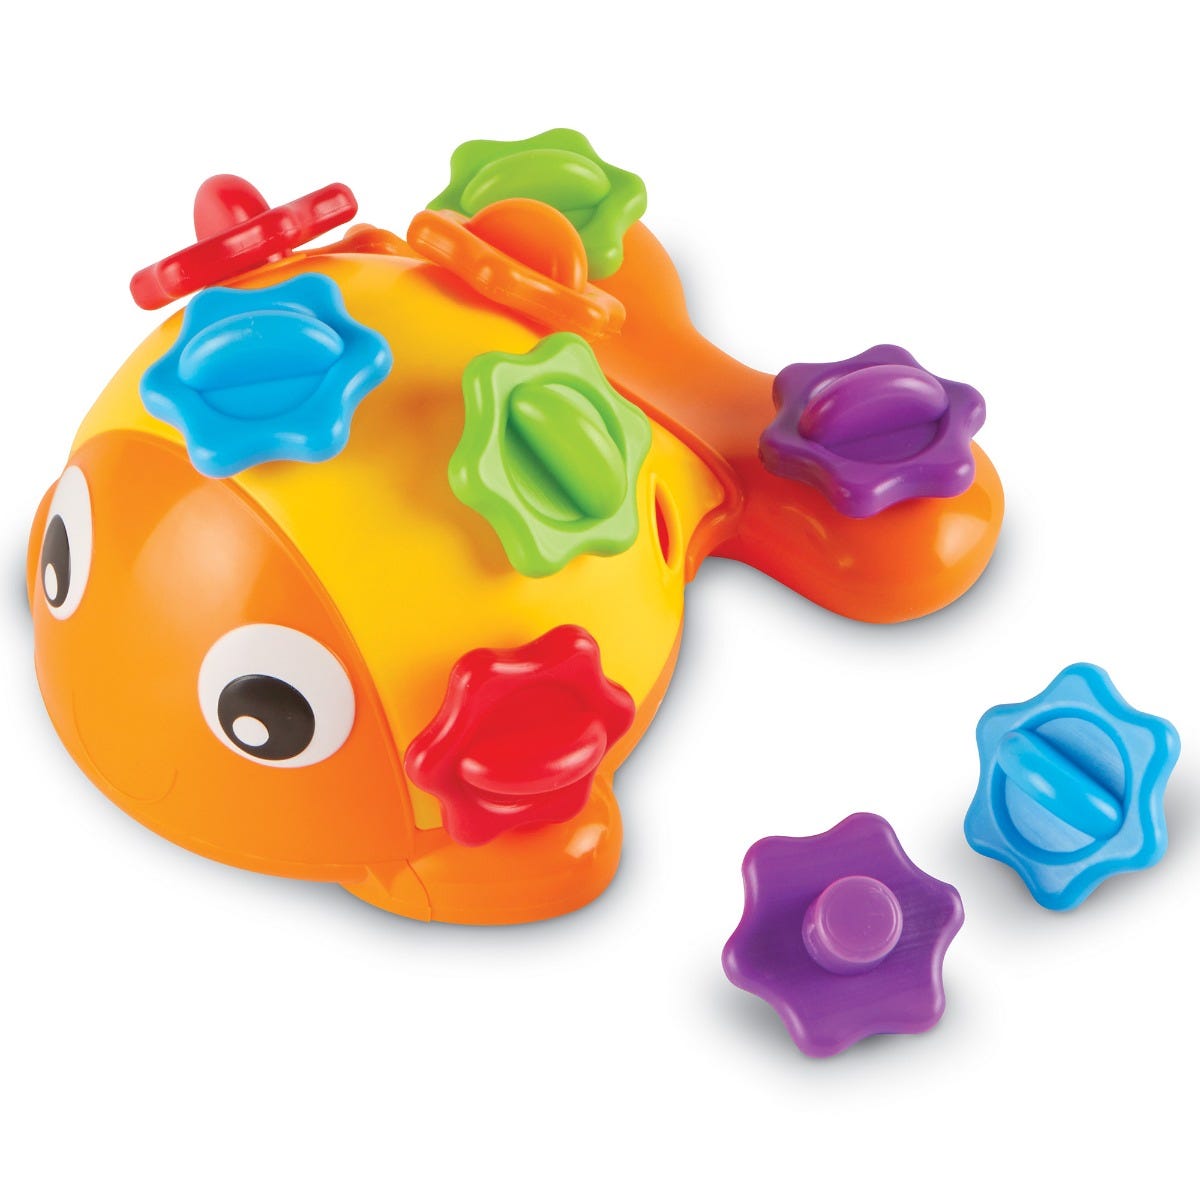 Finn the Fine Motor Fish, Meet Finn the Fine Motor Fish, the splashy, splashy fine motor toy that helps children build hand strength they need to succeed in school and beyond. This colourful Finn the Fine Motor Fish comes with 12 pinchable, pullable scales featuring indented surfaces that help children build pincer grasp skills, hand strength, wrist rotation and other whole-hand fine motor skills essentials. Finn the Fine Motor Fish Finn the Fine Motor Fish is a fun aquatic-themed fine motor toy that’s read